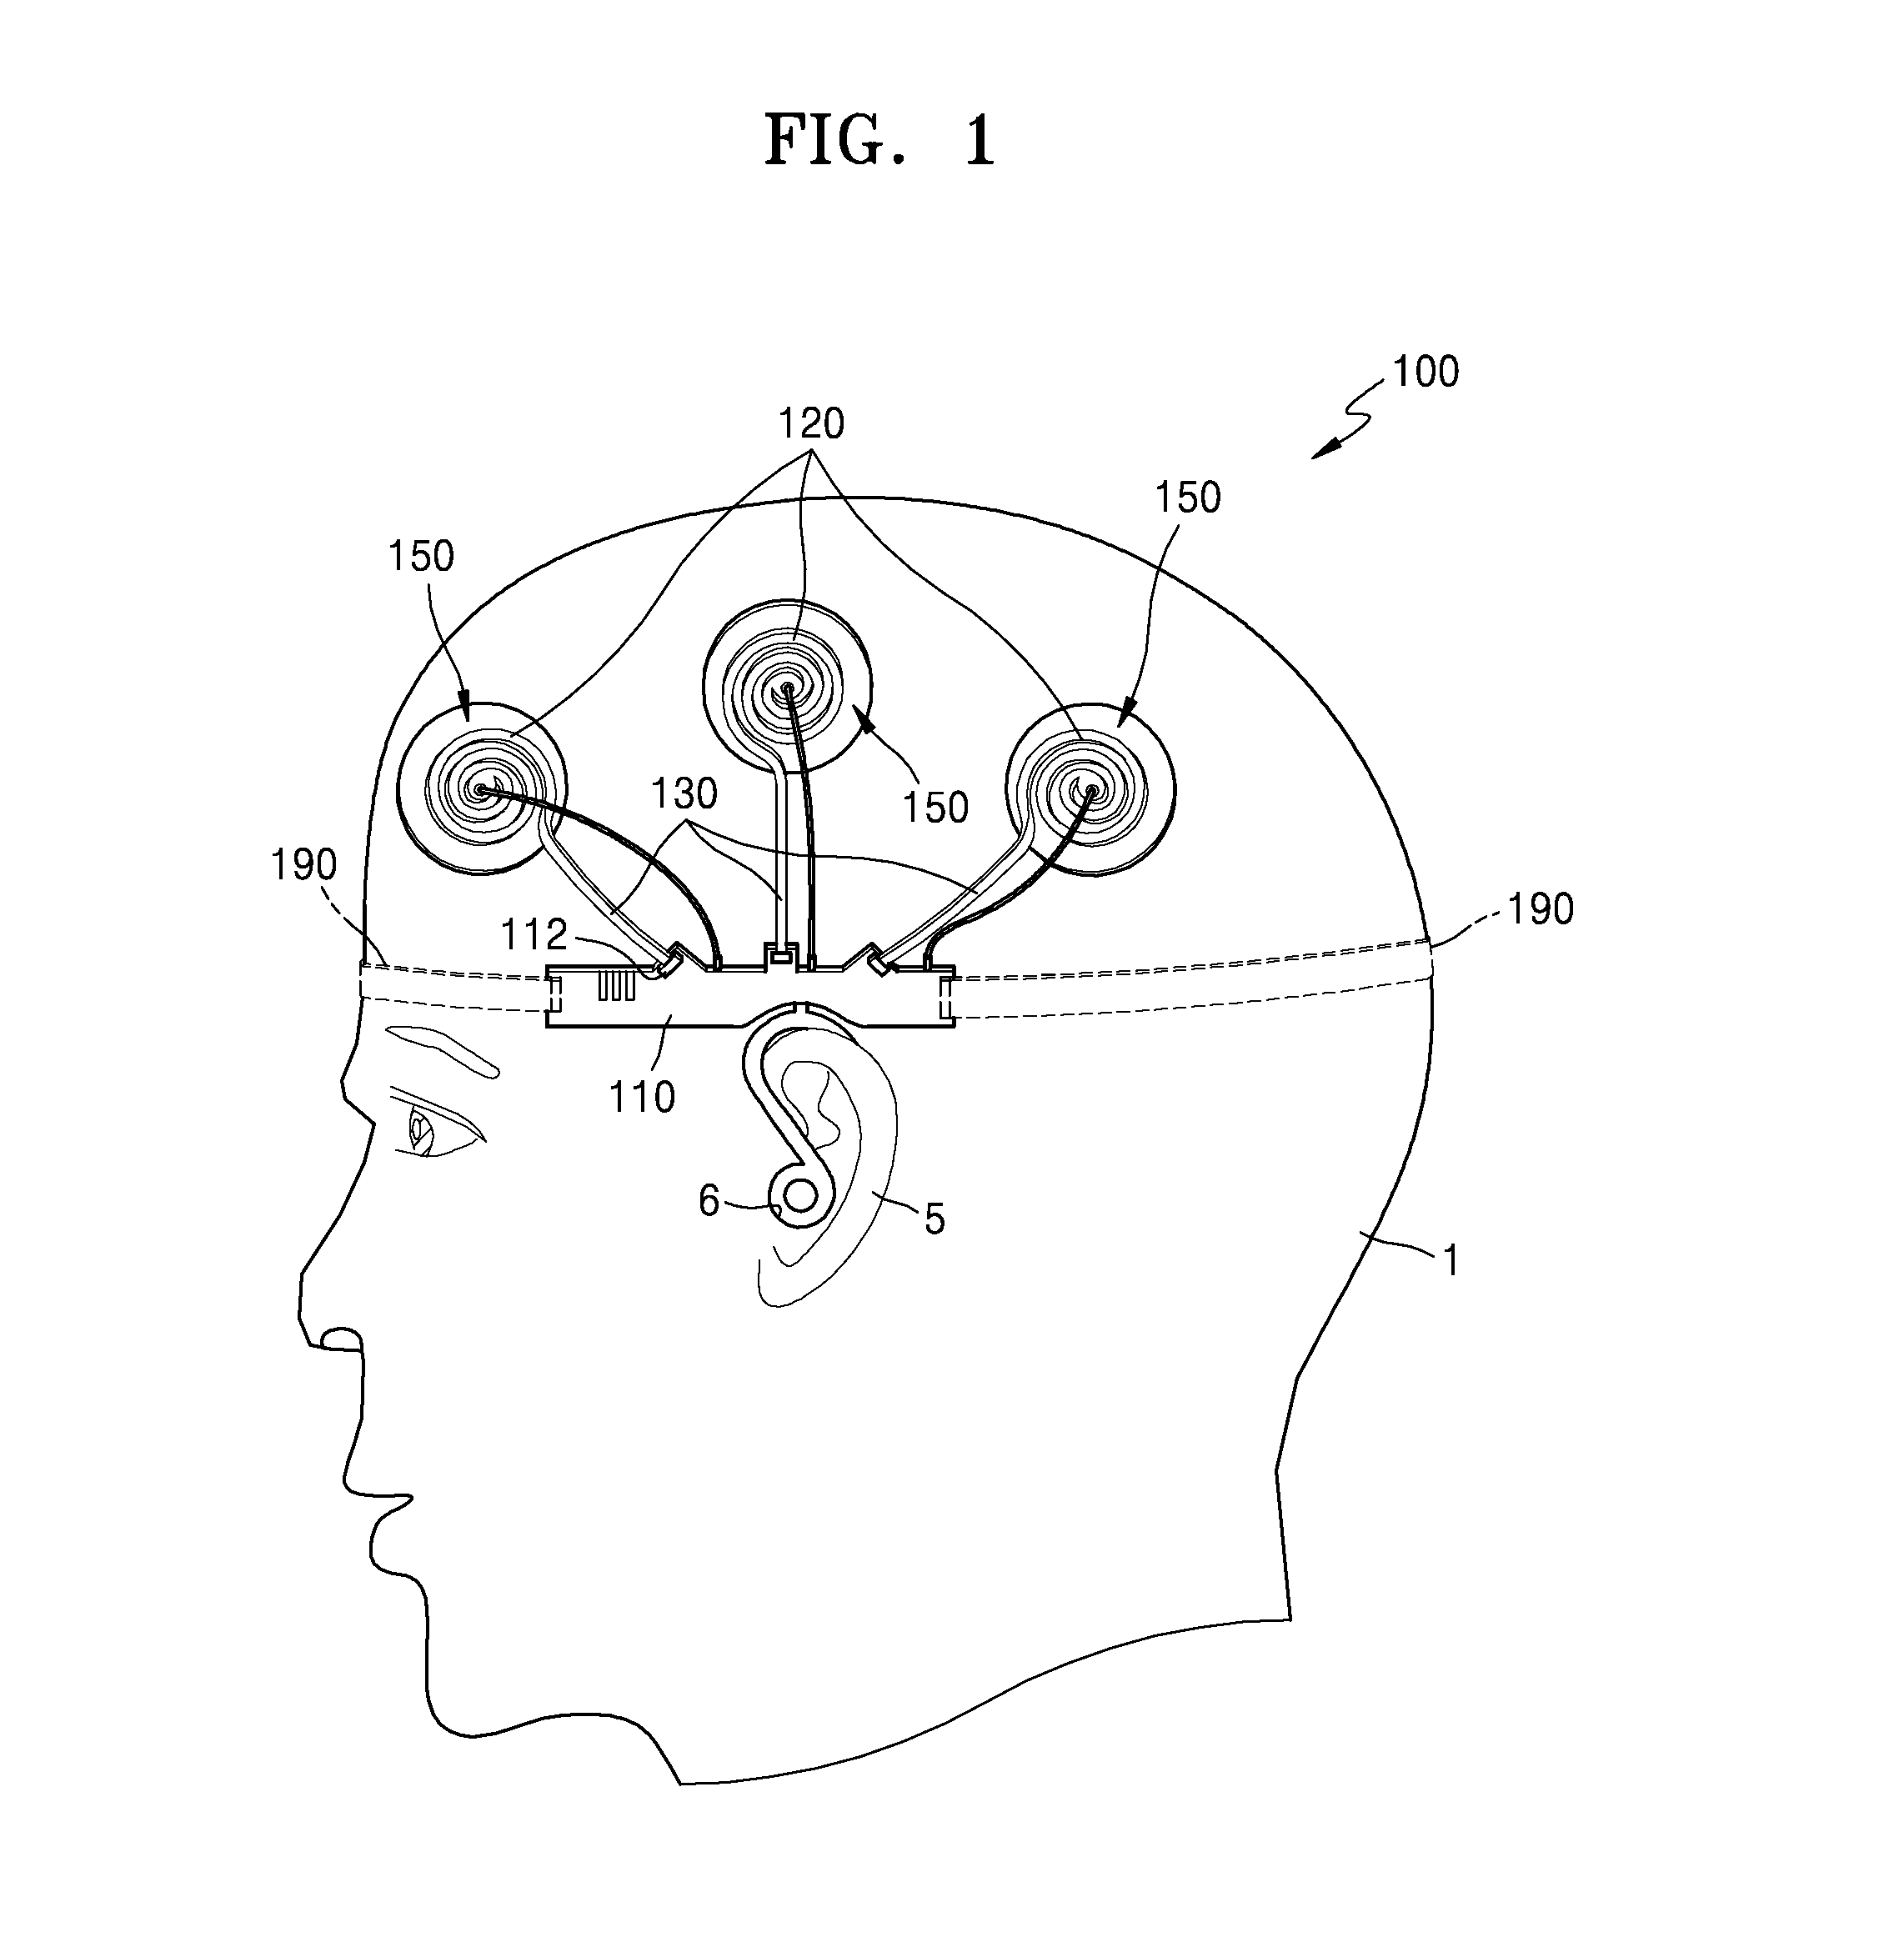 Apparatus for measuring bioelectrical signals